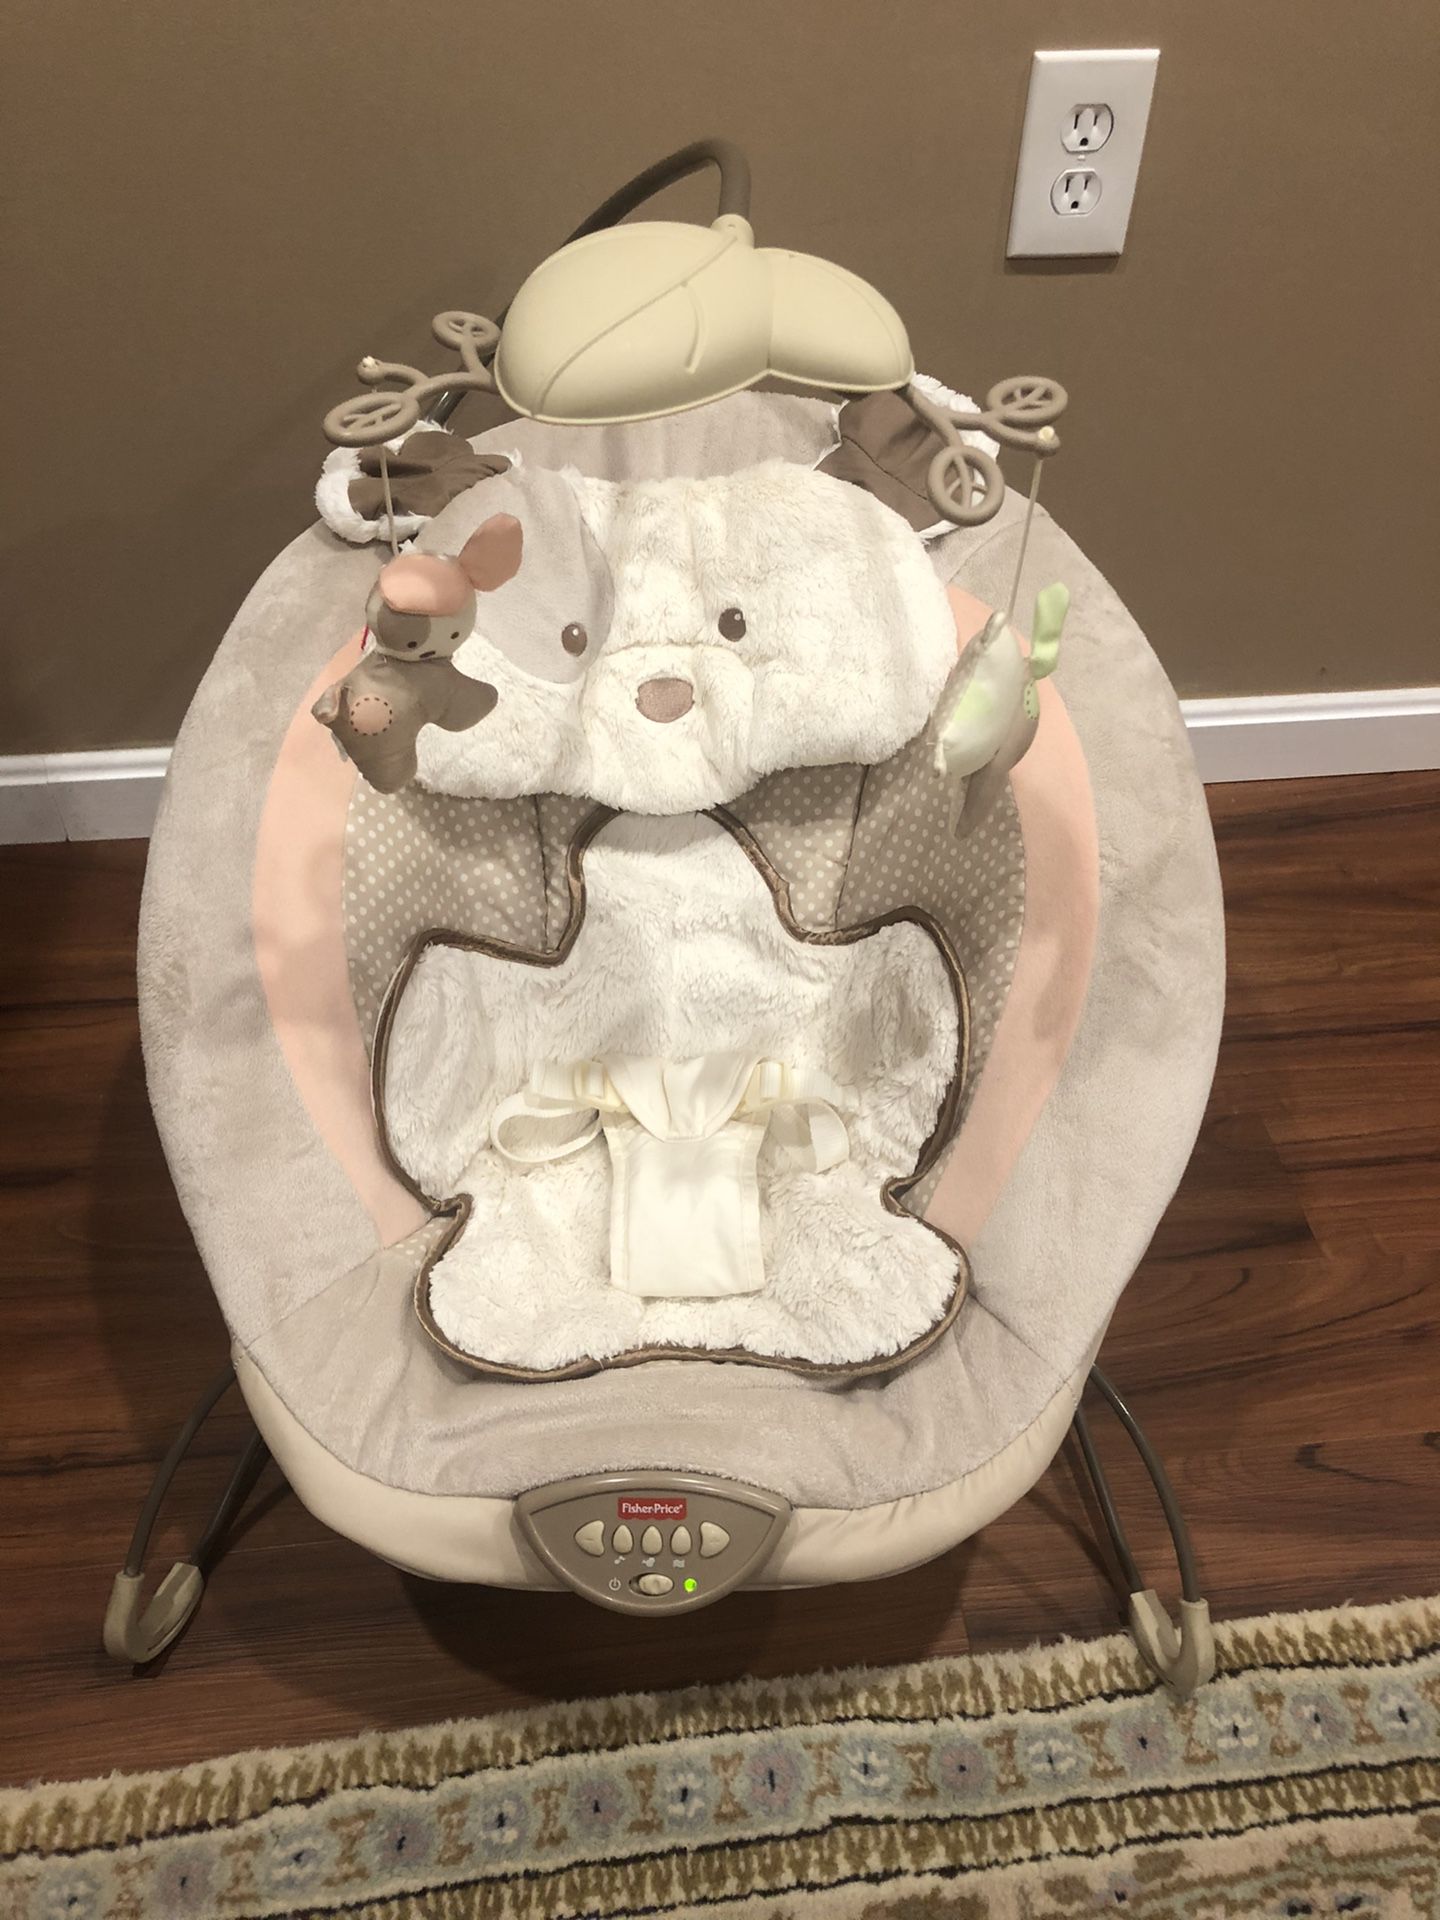 Fisher-Price baby bouncy